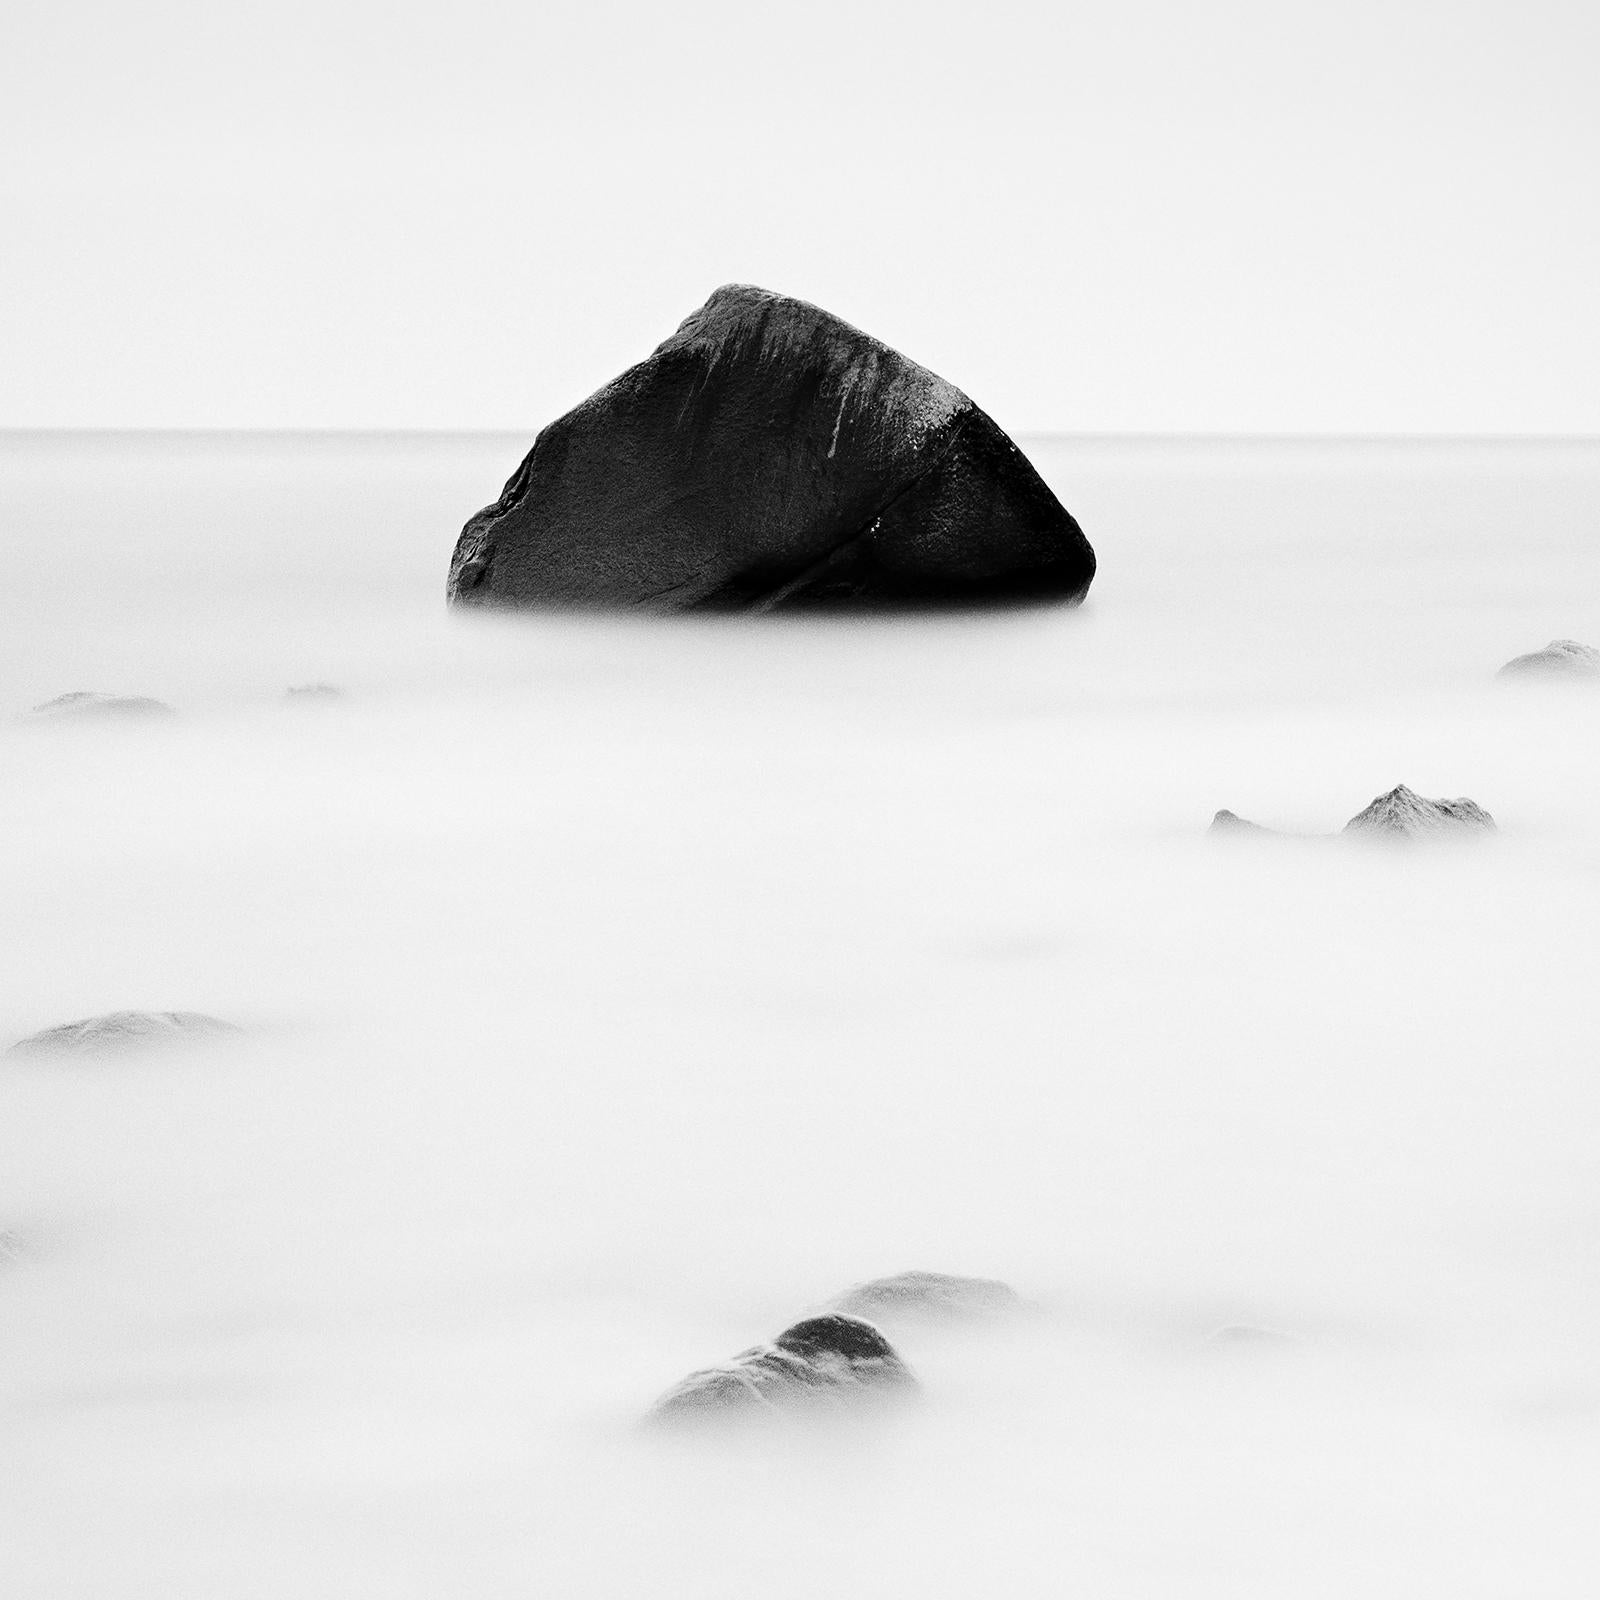 Glacial Erratic, Great Rocks, Germany, black and white, long exposure landscape  For Sale 3